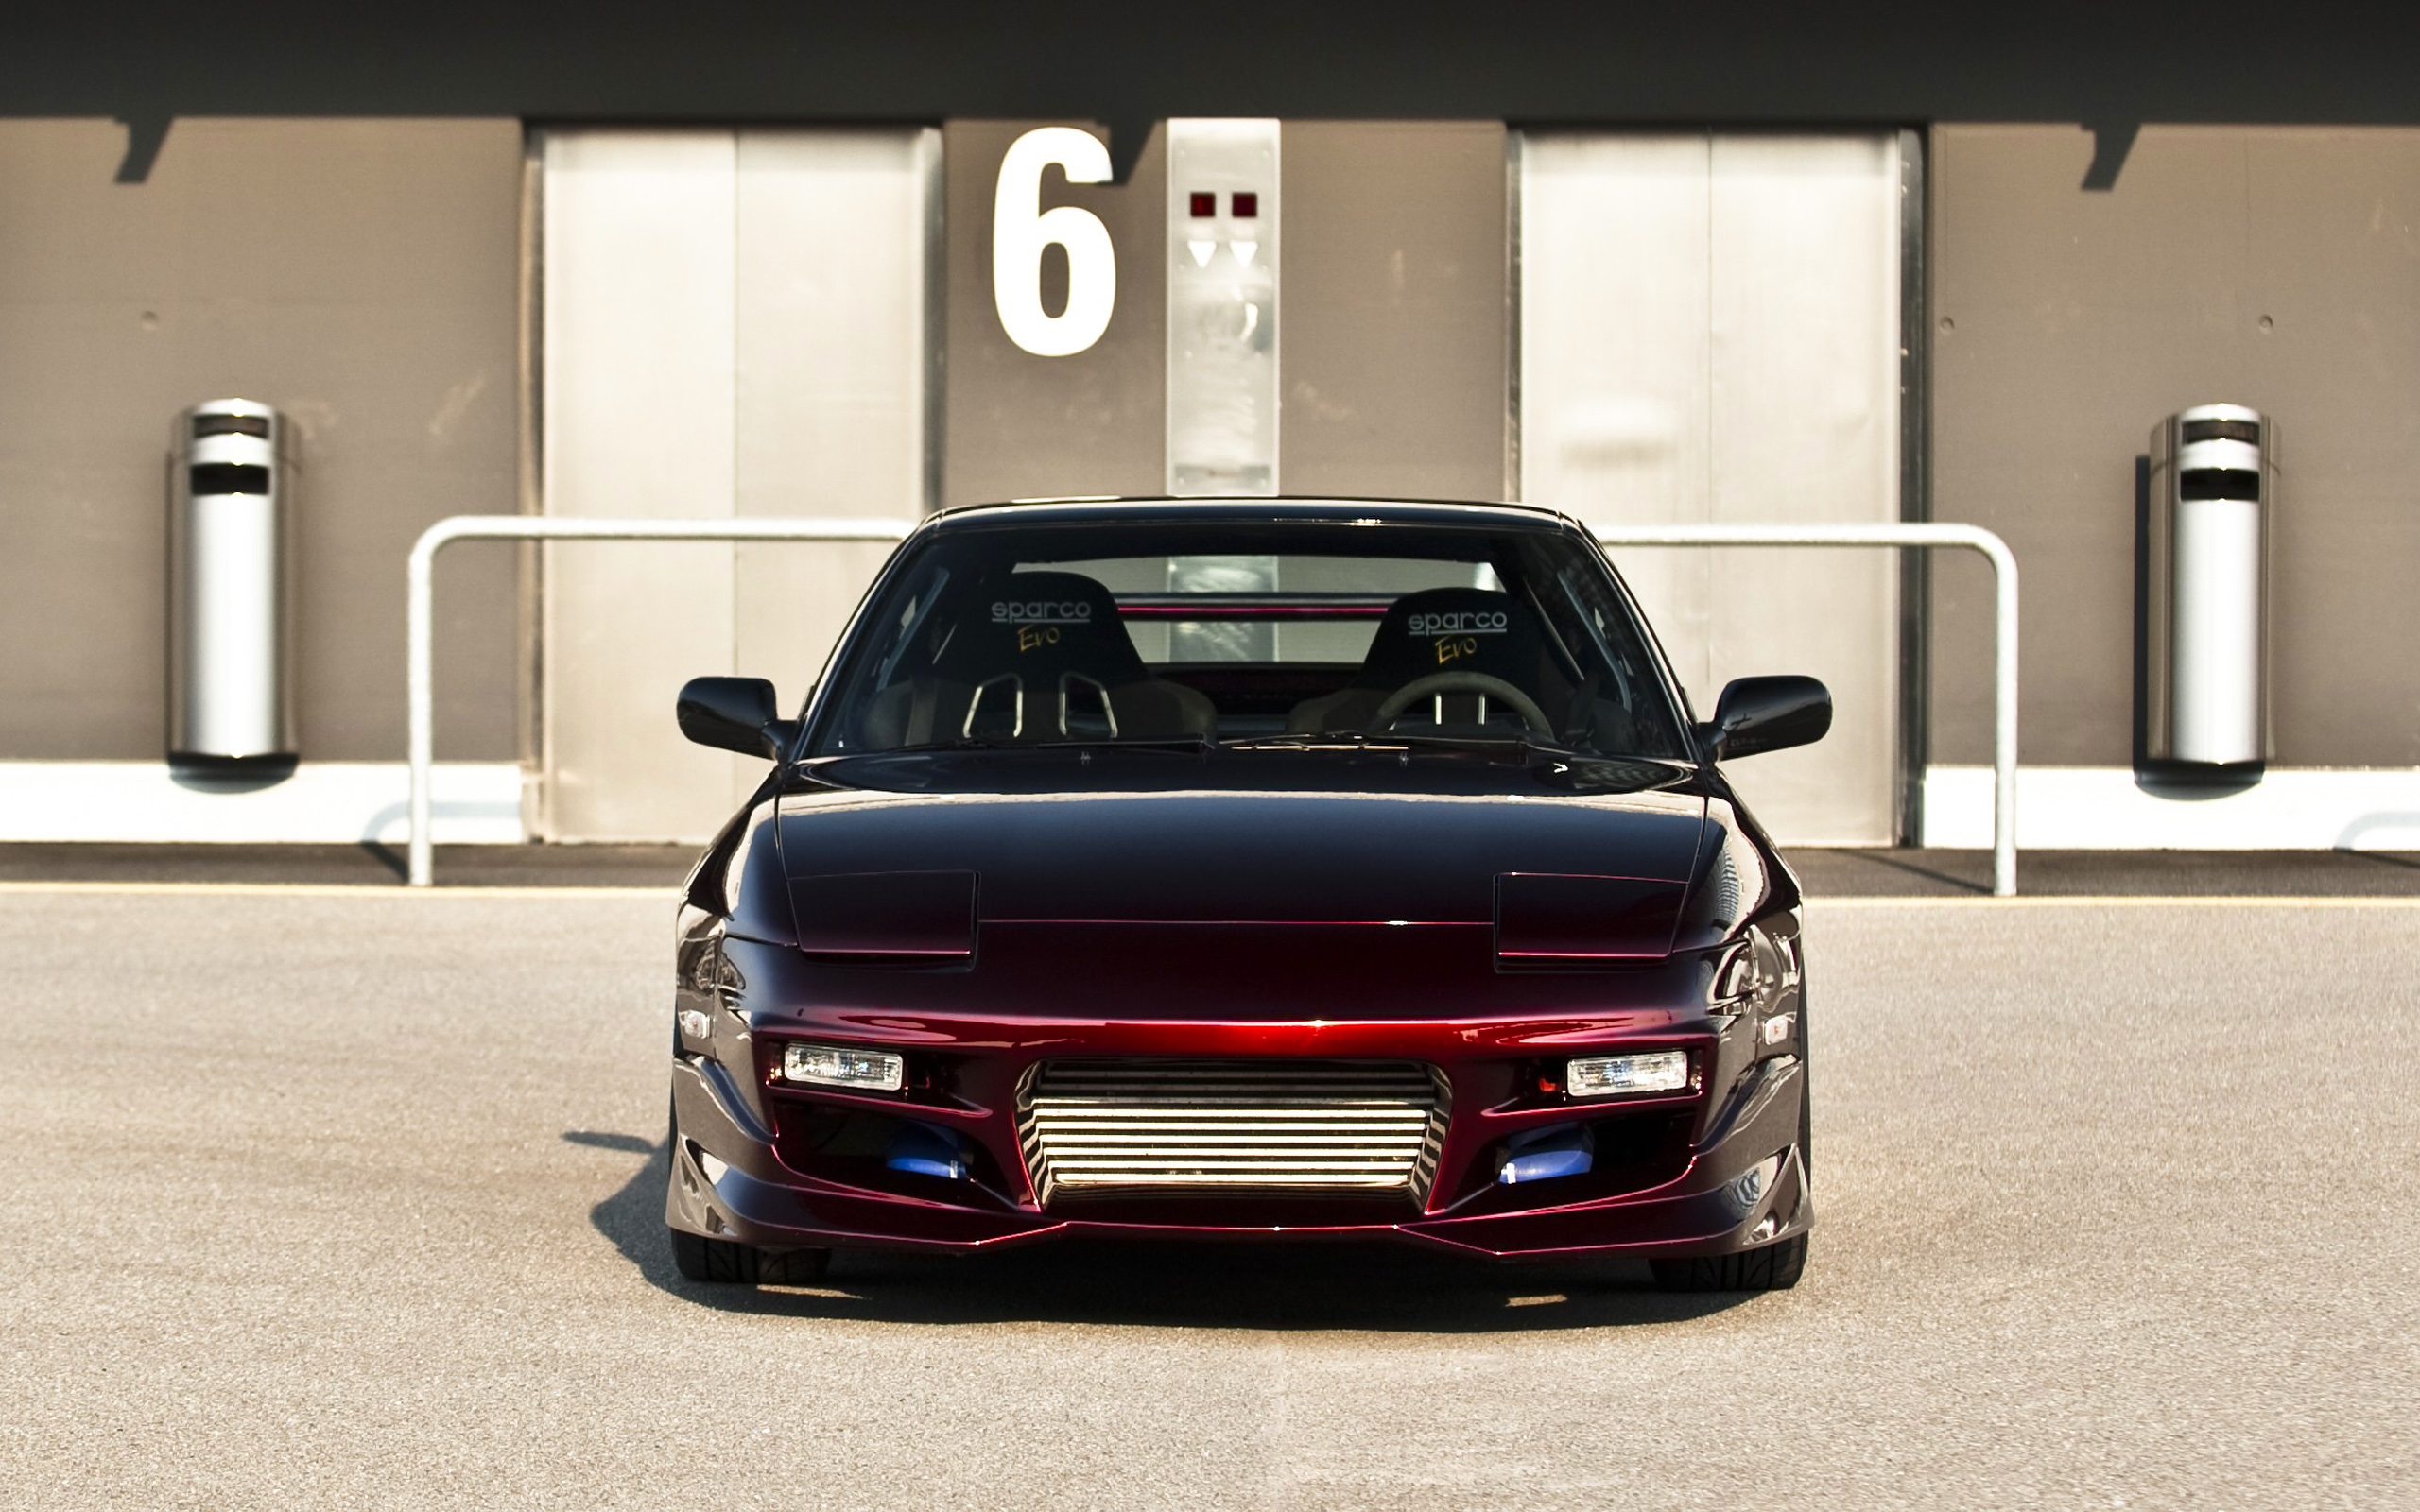 Nissan 180sx, Sportcars, Tuning, Japanese Cars, Nissan - 180sx 壁紙 , HD Wallpaper & Backgrounds